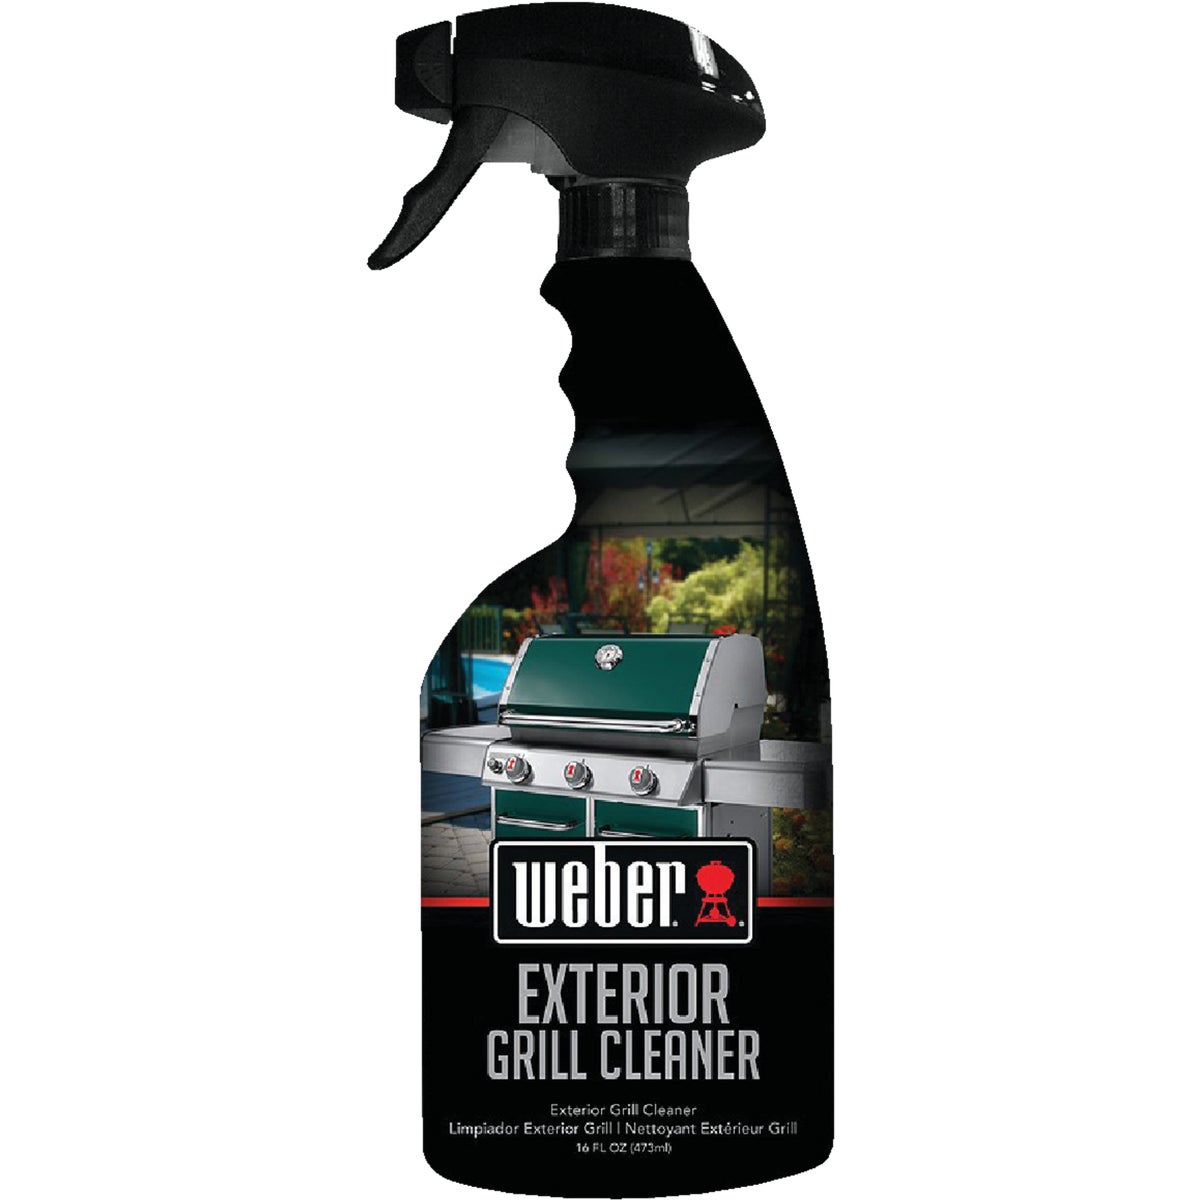 Item 800504, Weber Exterior Grill Cleaner removes dirt and grime to keep your grill 